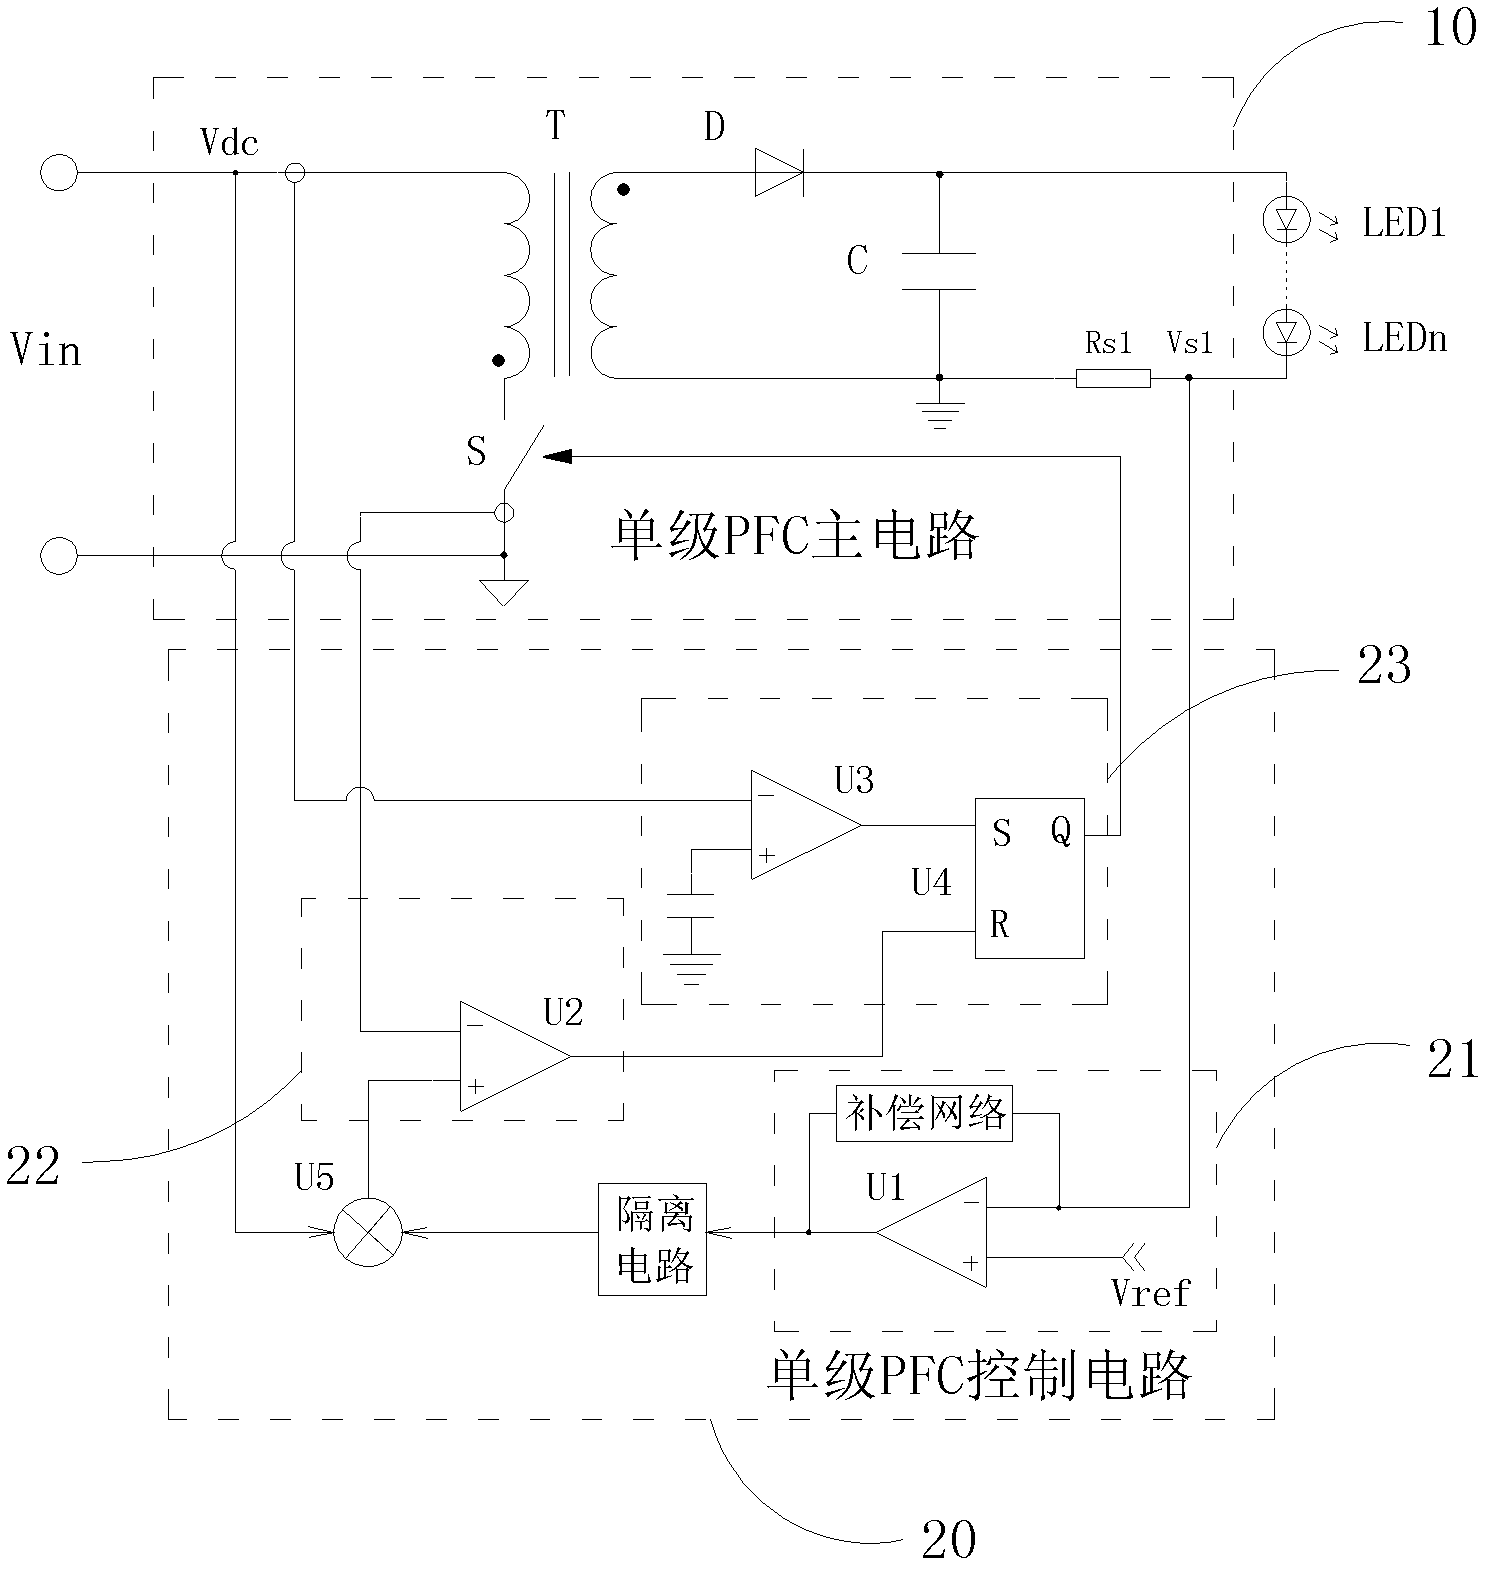 Constant current driver of light emitting diode